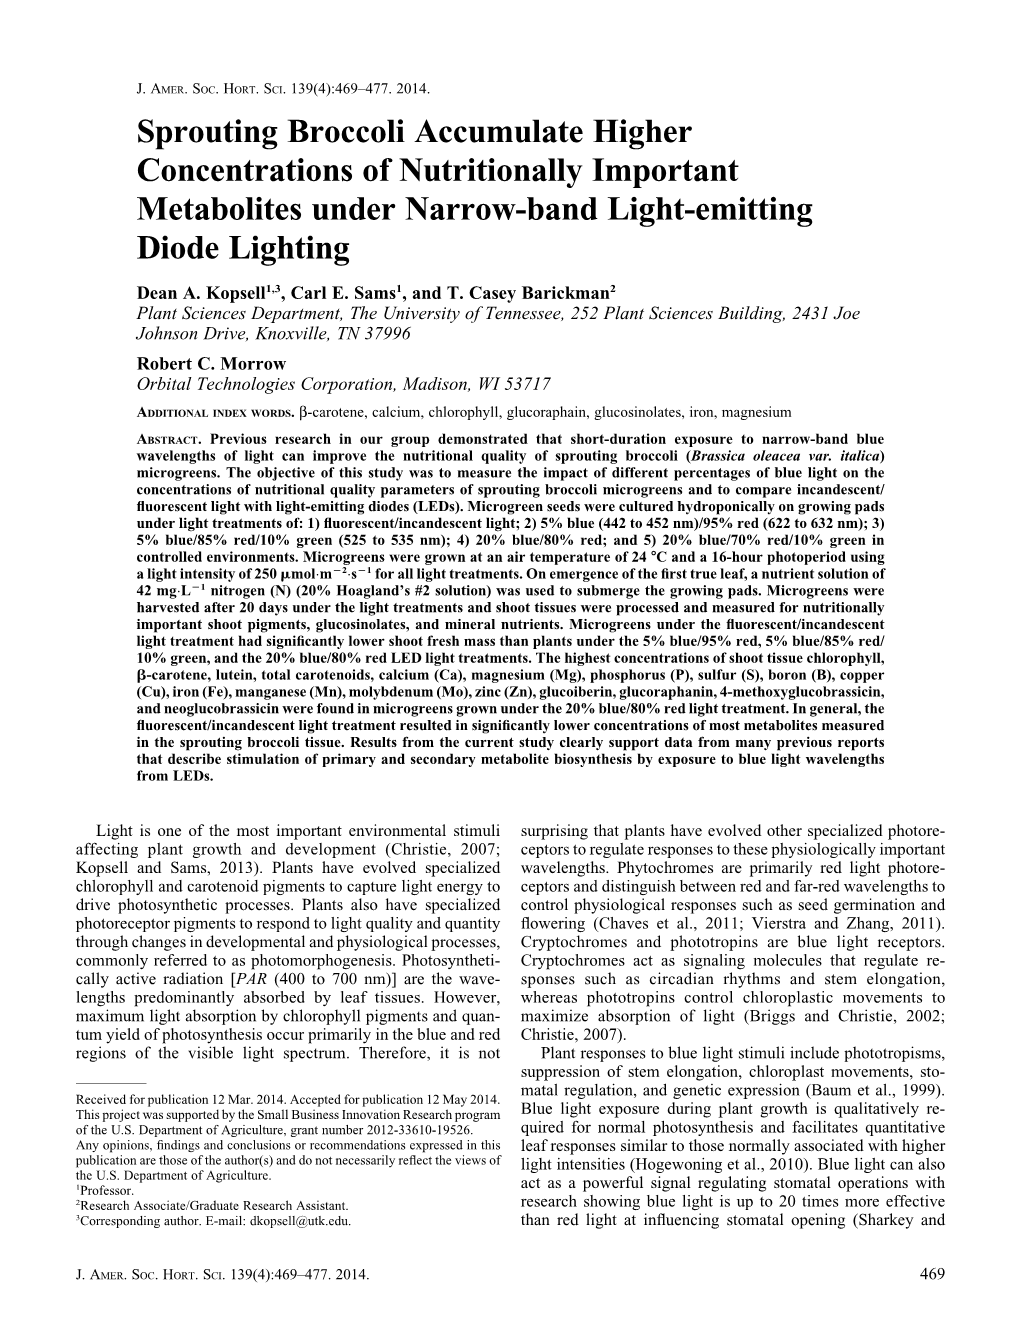 Sprouting Broccoli Accumulate Higher Concentrations of Nutritionally Important Metabolites Under Narrow-Band Light-Emitting Diode Lighting